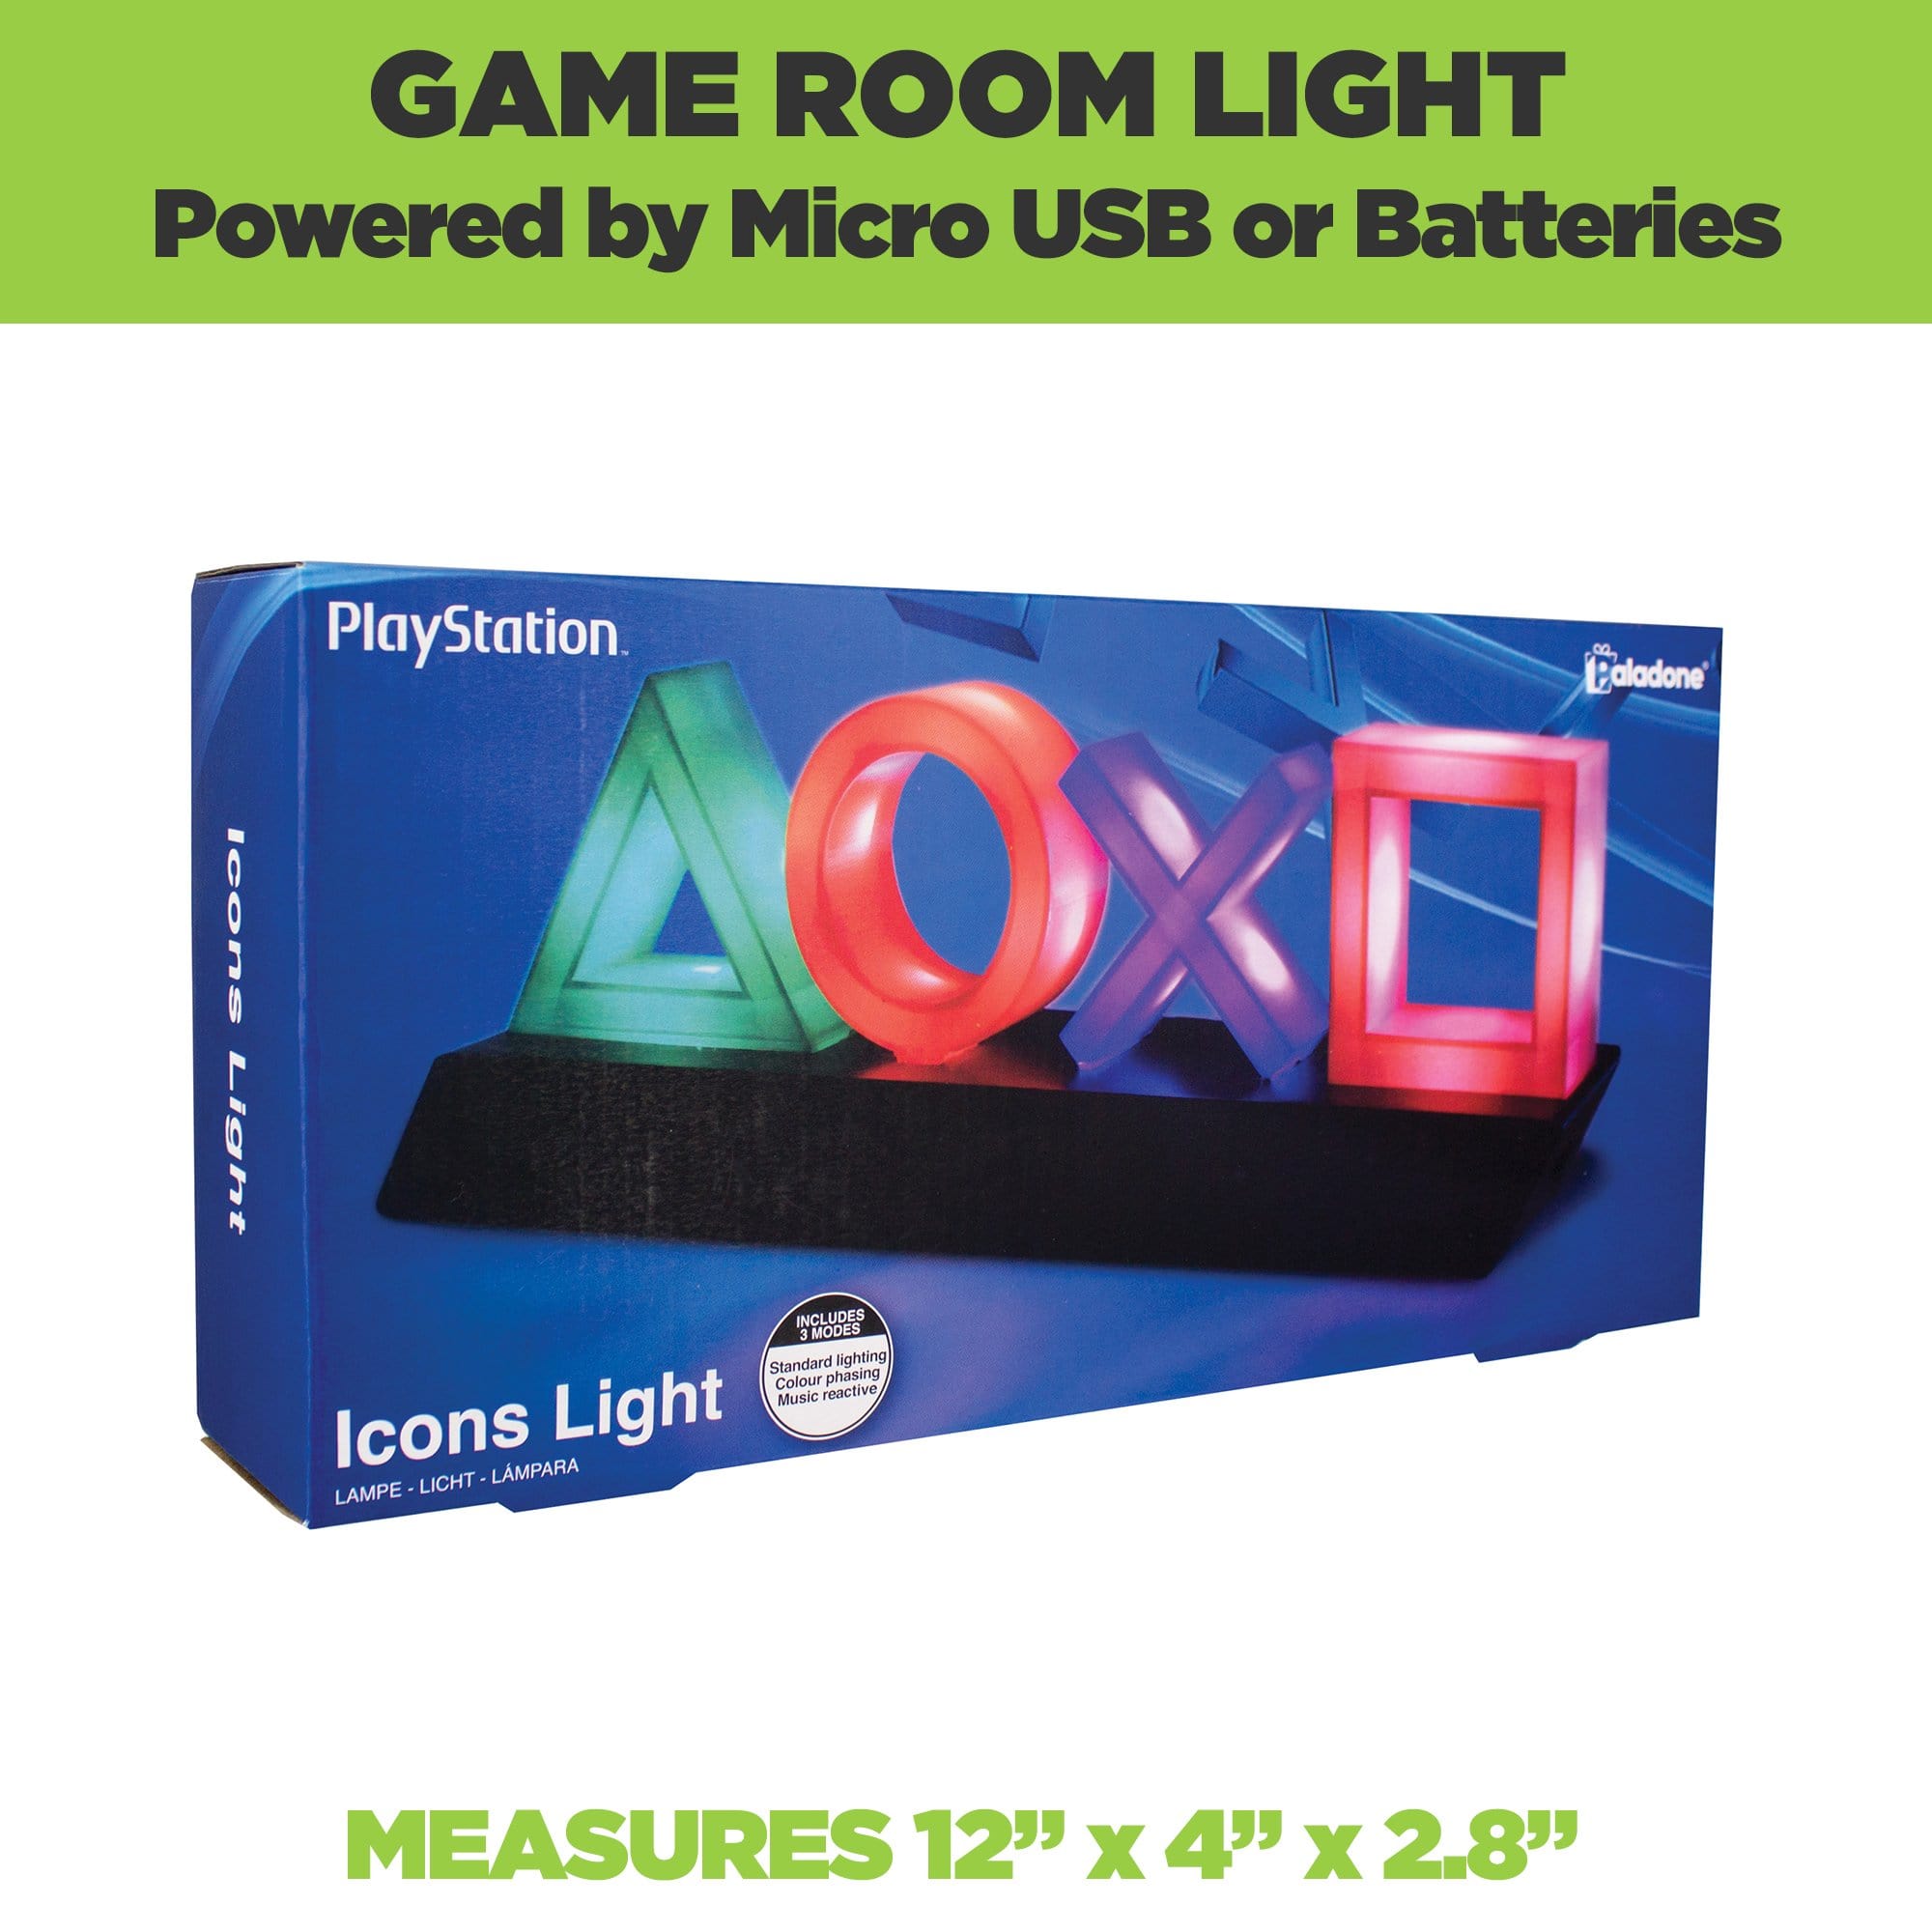 Official Playstation symbol light come in official Playstation packaging.